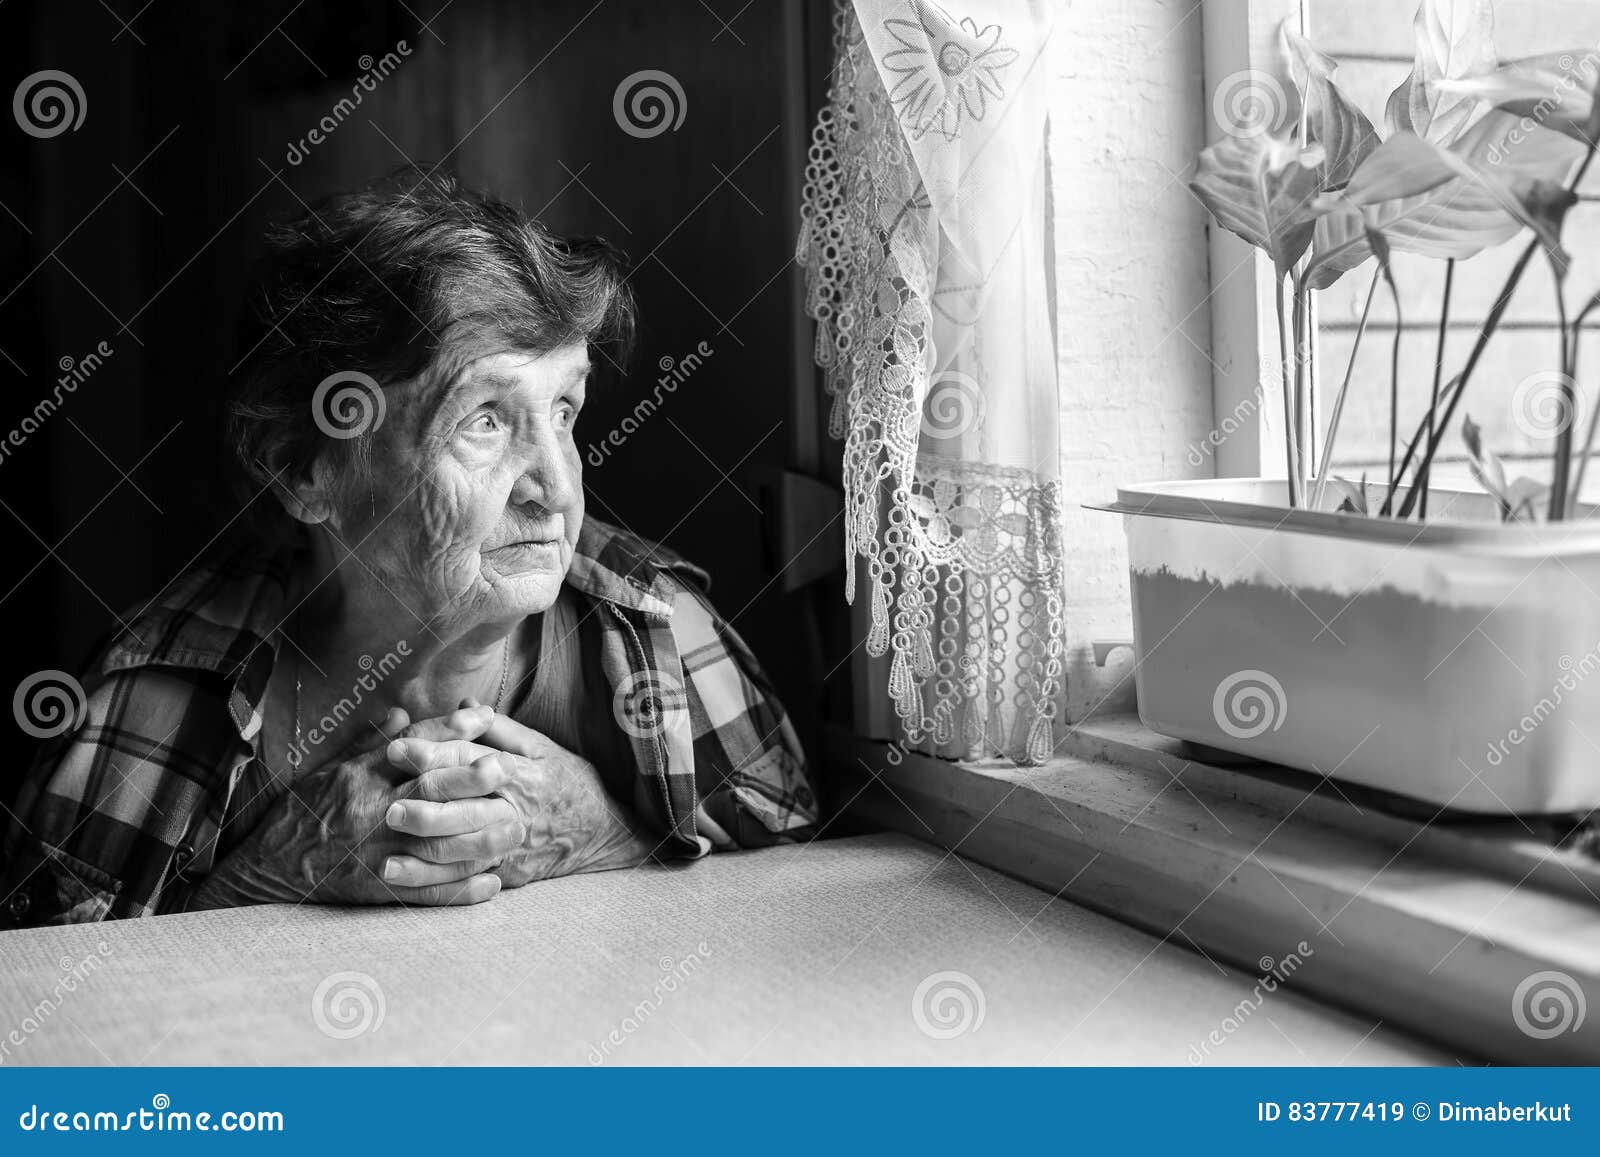 Elderly woman looks wistfully out the window. Black-and-white photo.